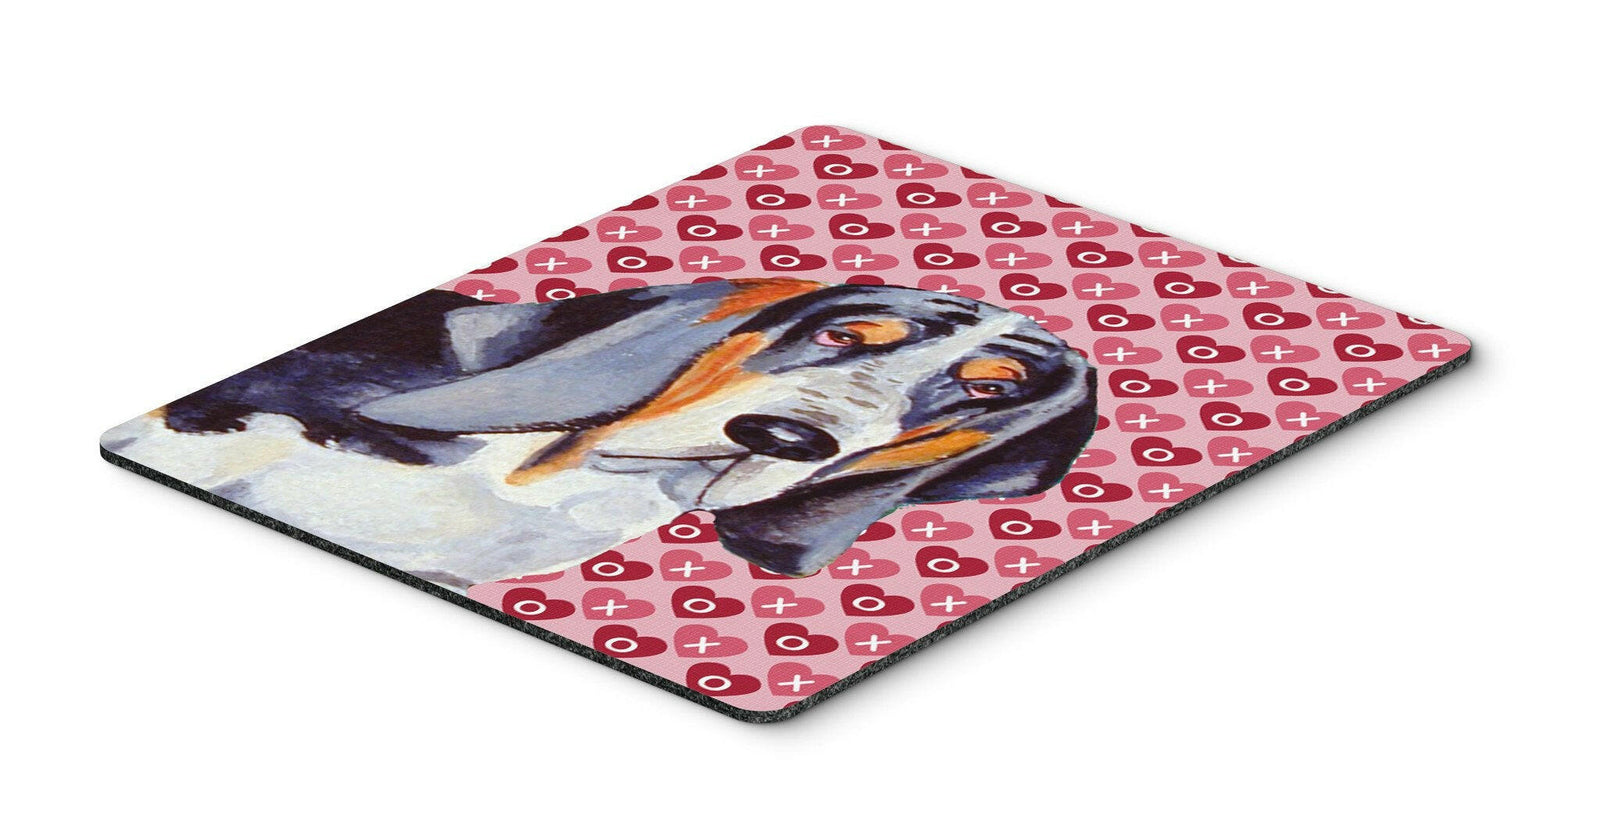 Basset Hound Hearts Love and Valentine's Day Mouse Pad, Hot Pad or Trivet by Caroline's Treasures